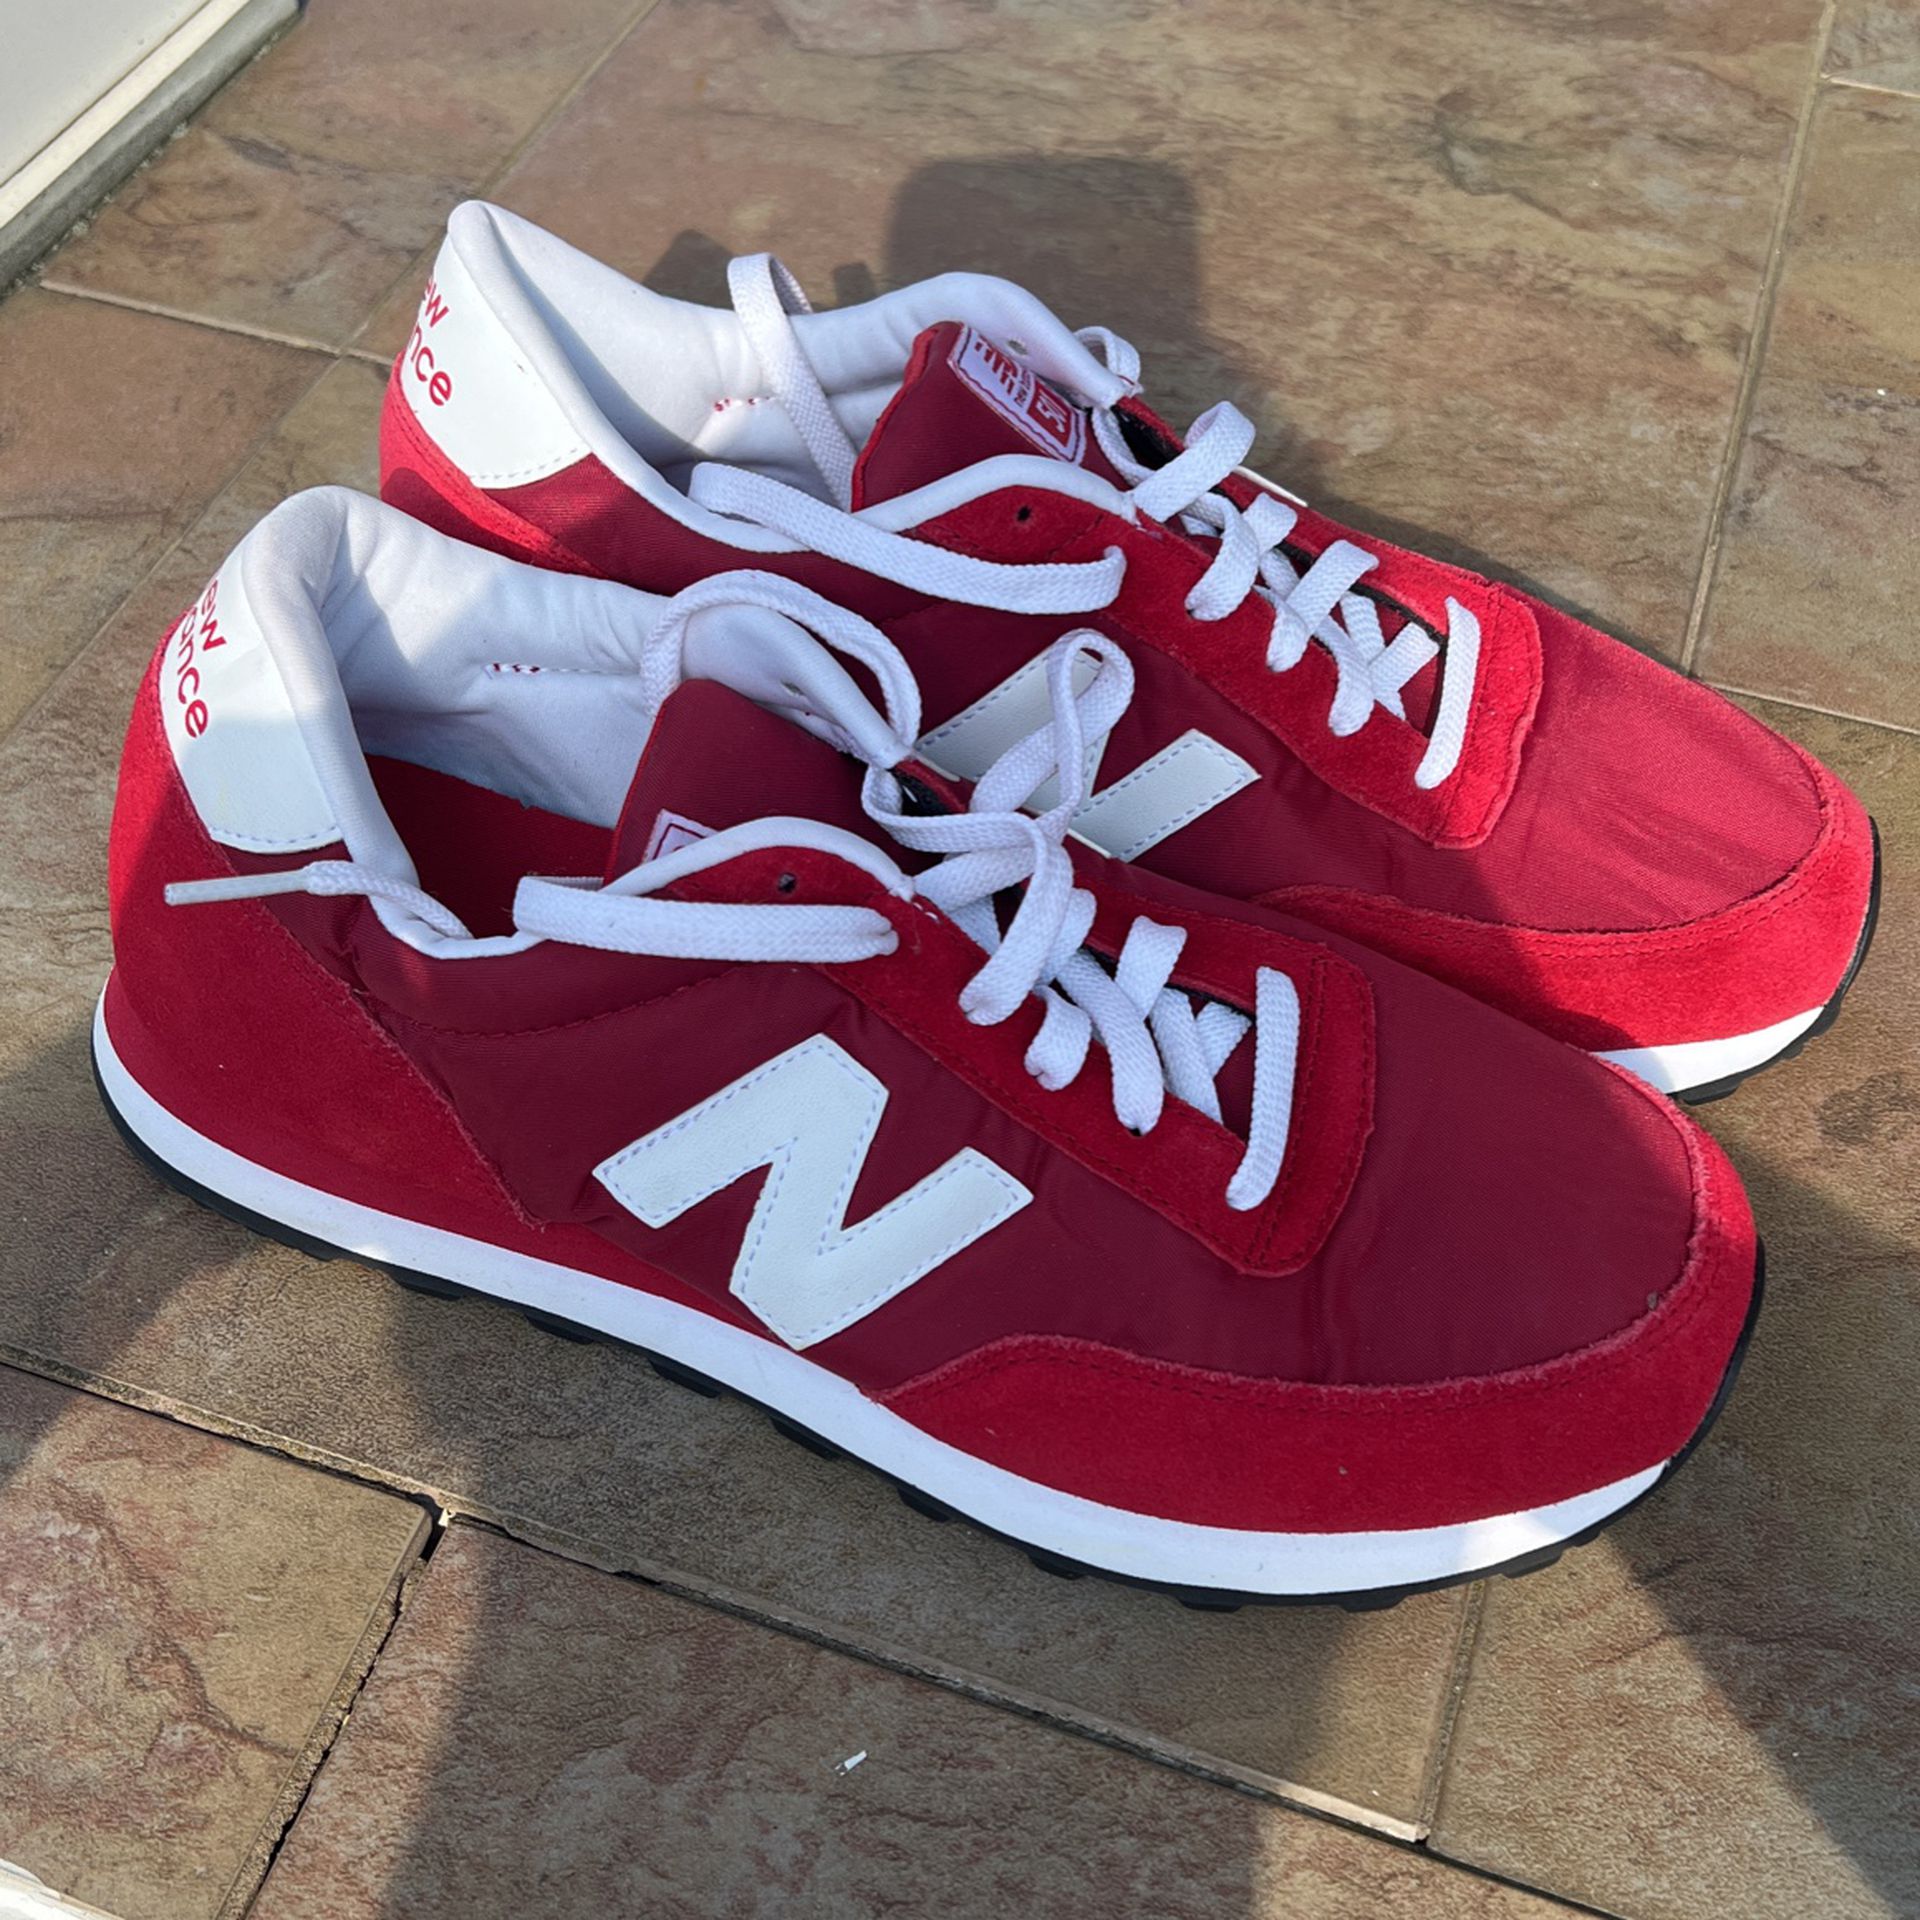 New Balance 501 Red White Never Worn Size 11 For Sale In North Massapequa,  Ny - Offerup